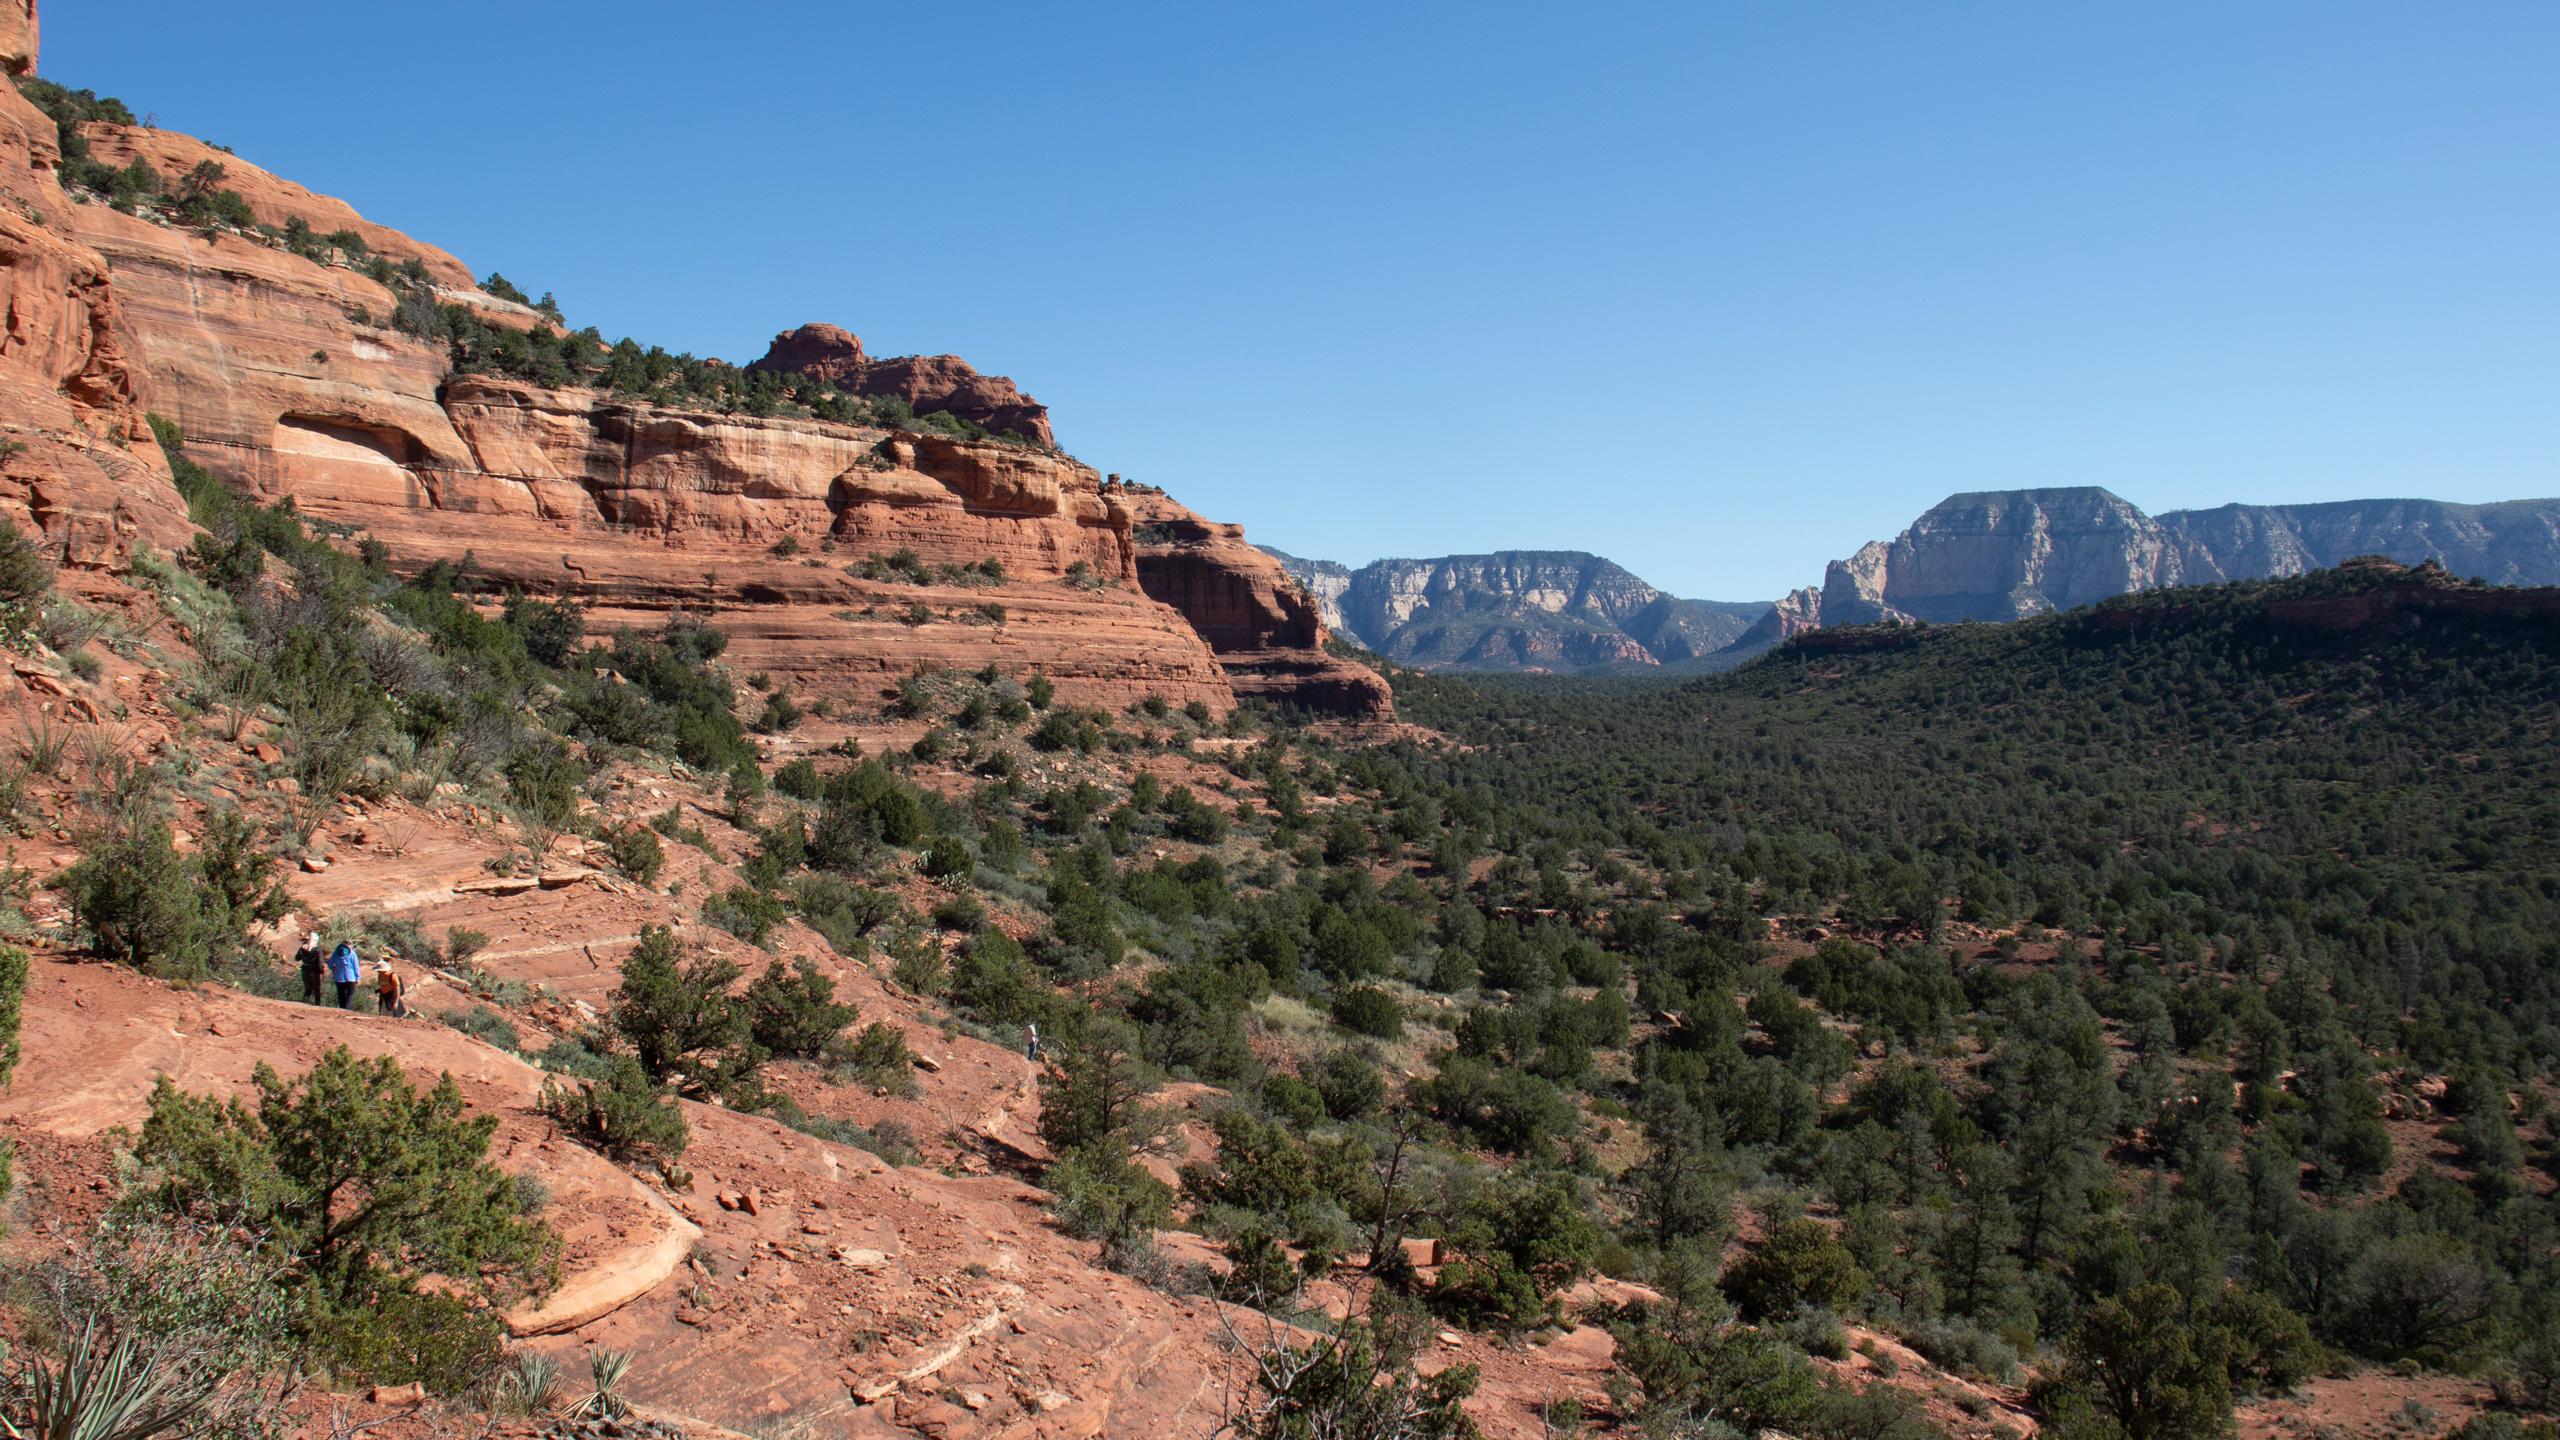 hikers on trail in red rocks of Sedona